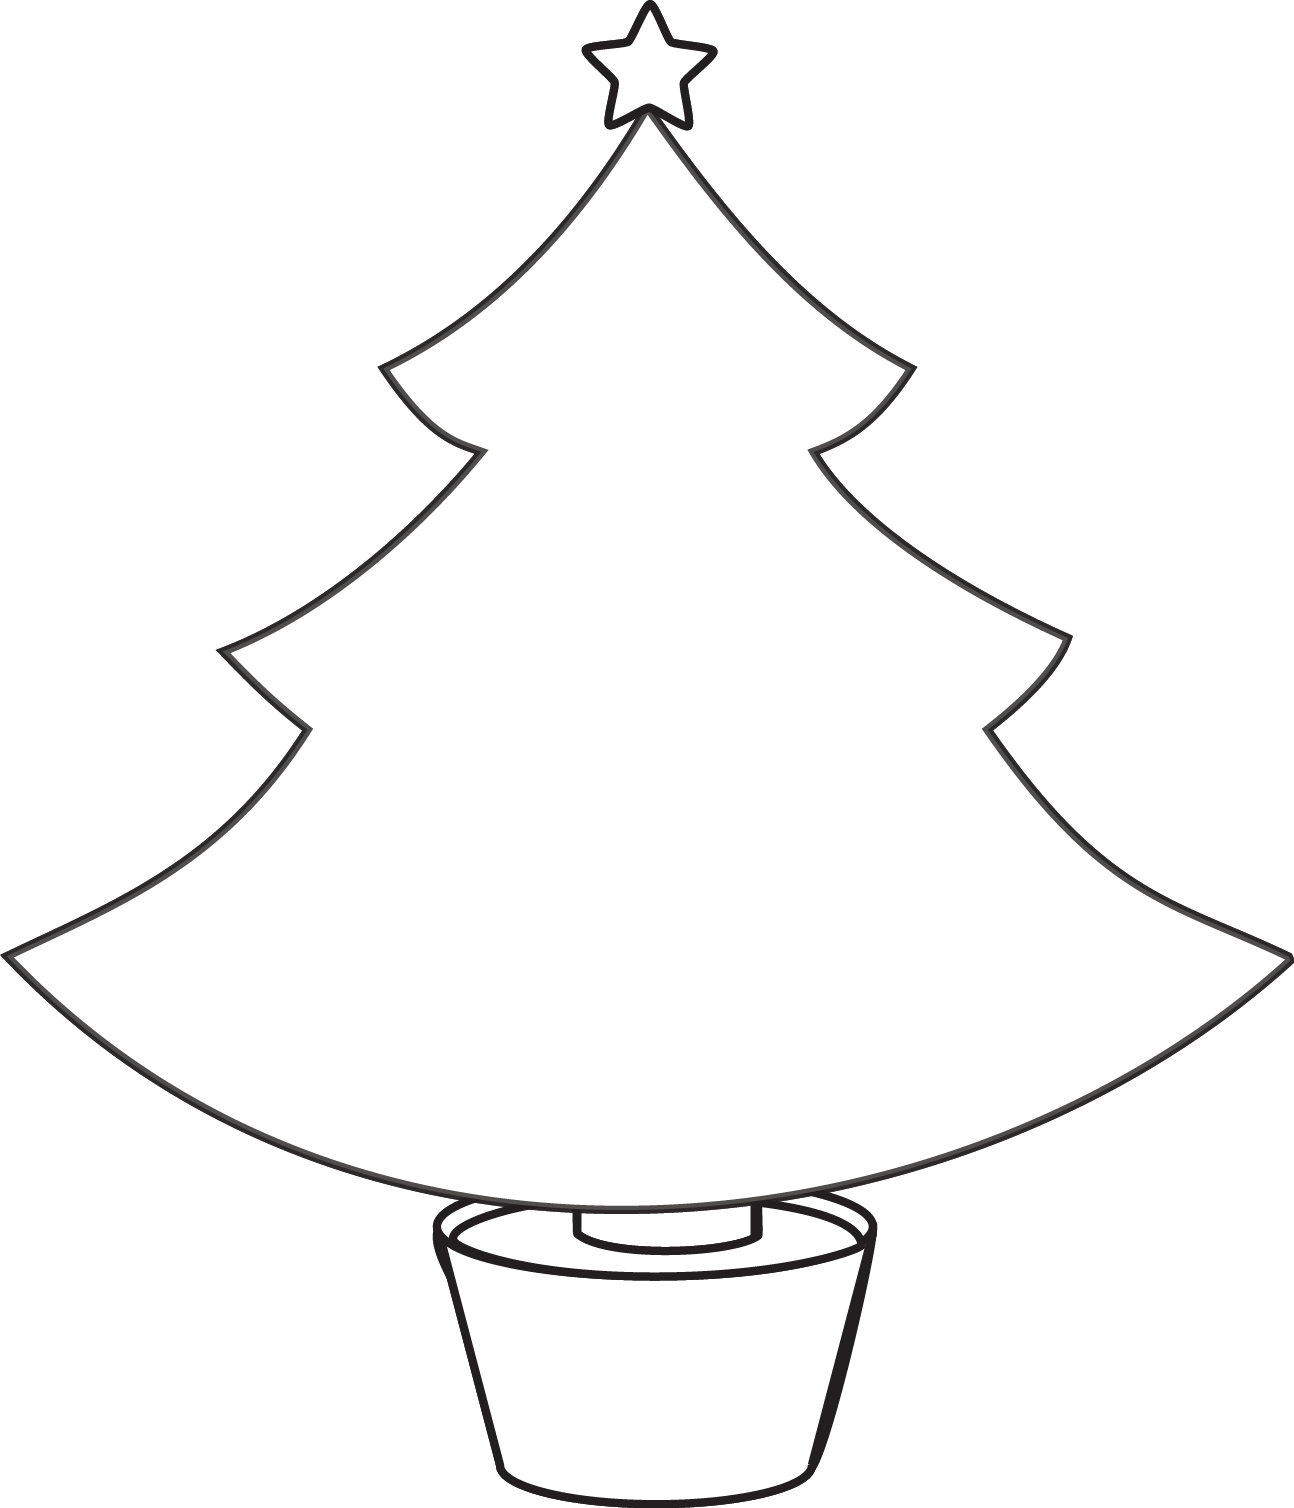 Christmas Tree Color Game For Kids Free Online Download Background Coloring  Pictures Of Christmas Background Image And Wallpaper for Free Download